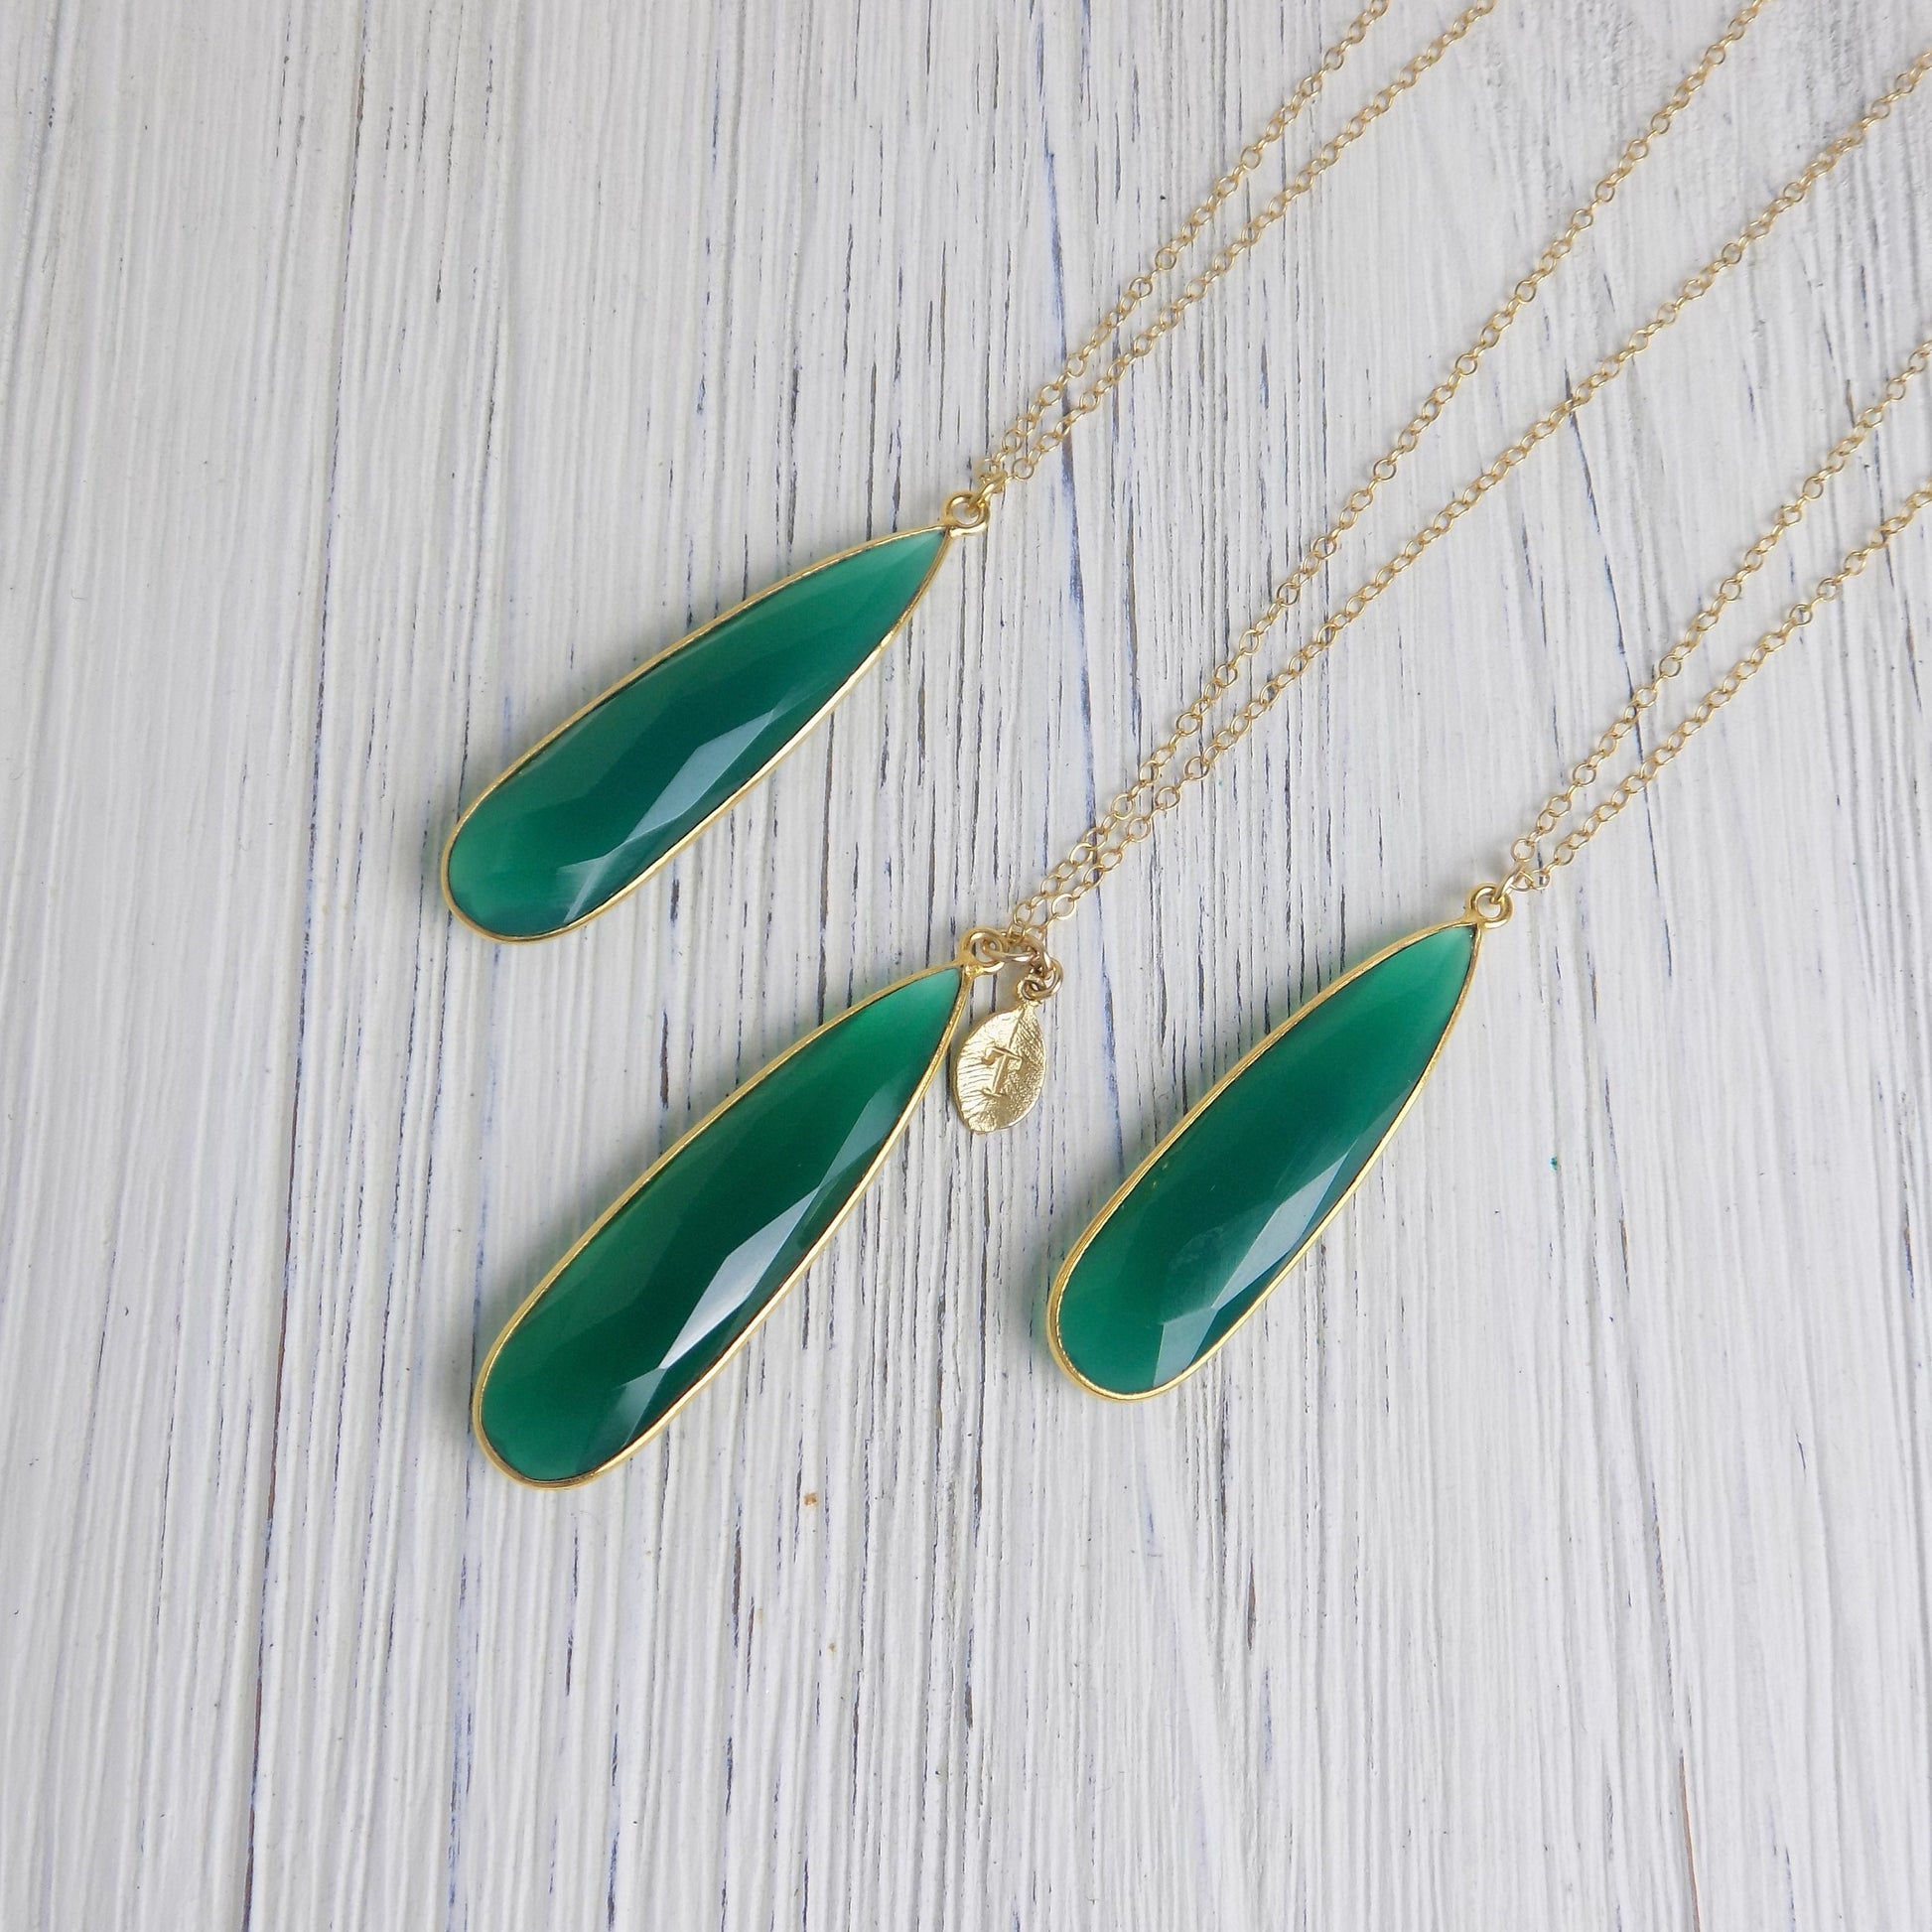 Gifts For Her, Large Green Onyx Necklace with Custom Initial Charm on 14K Gold Filled Chain, M6-36